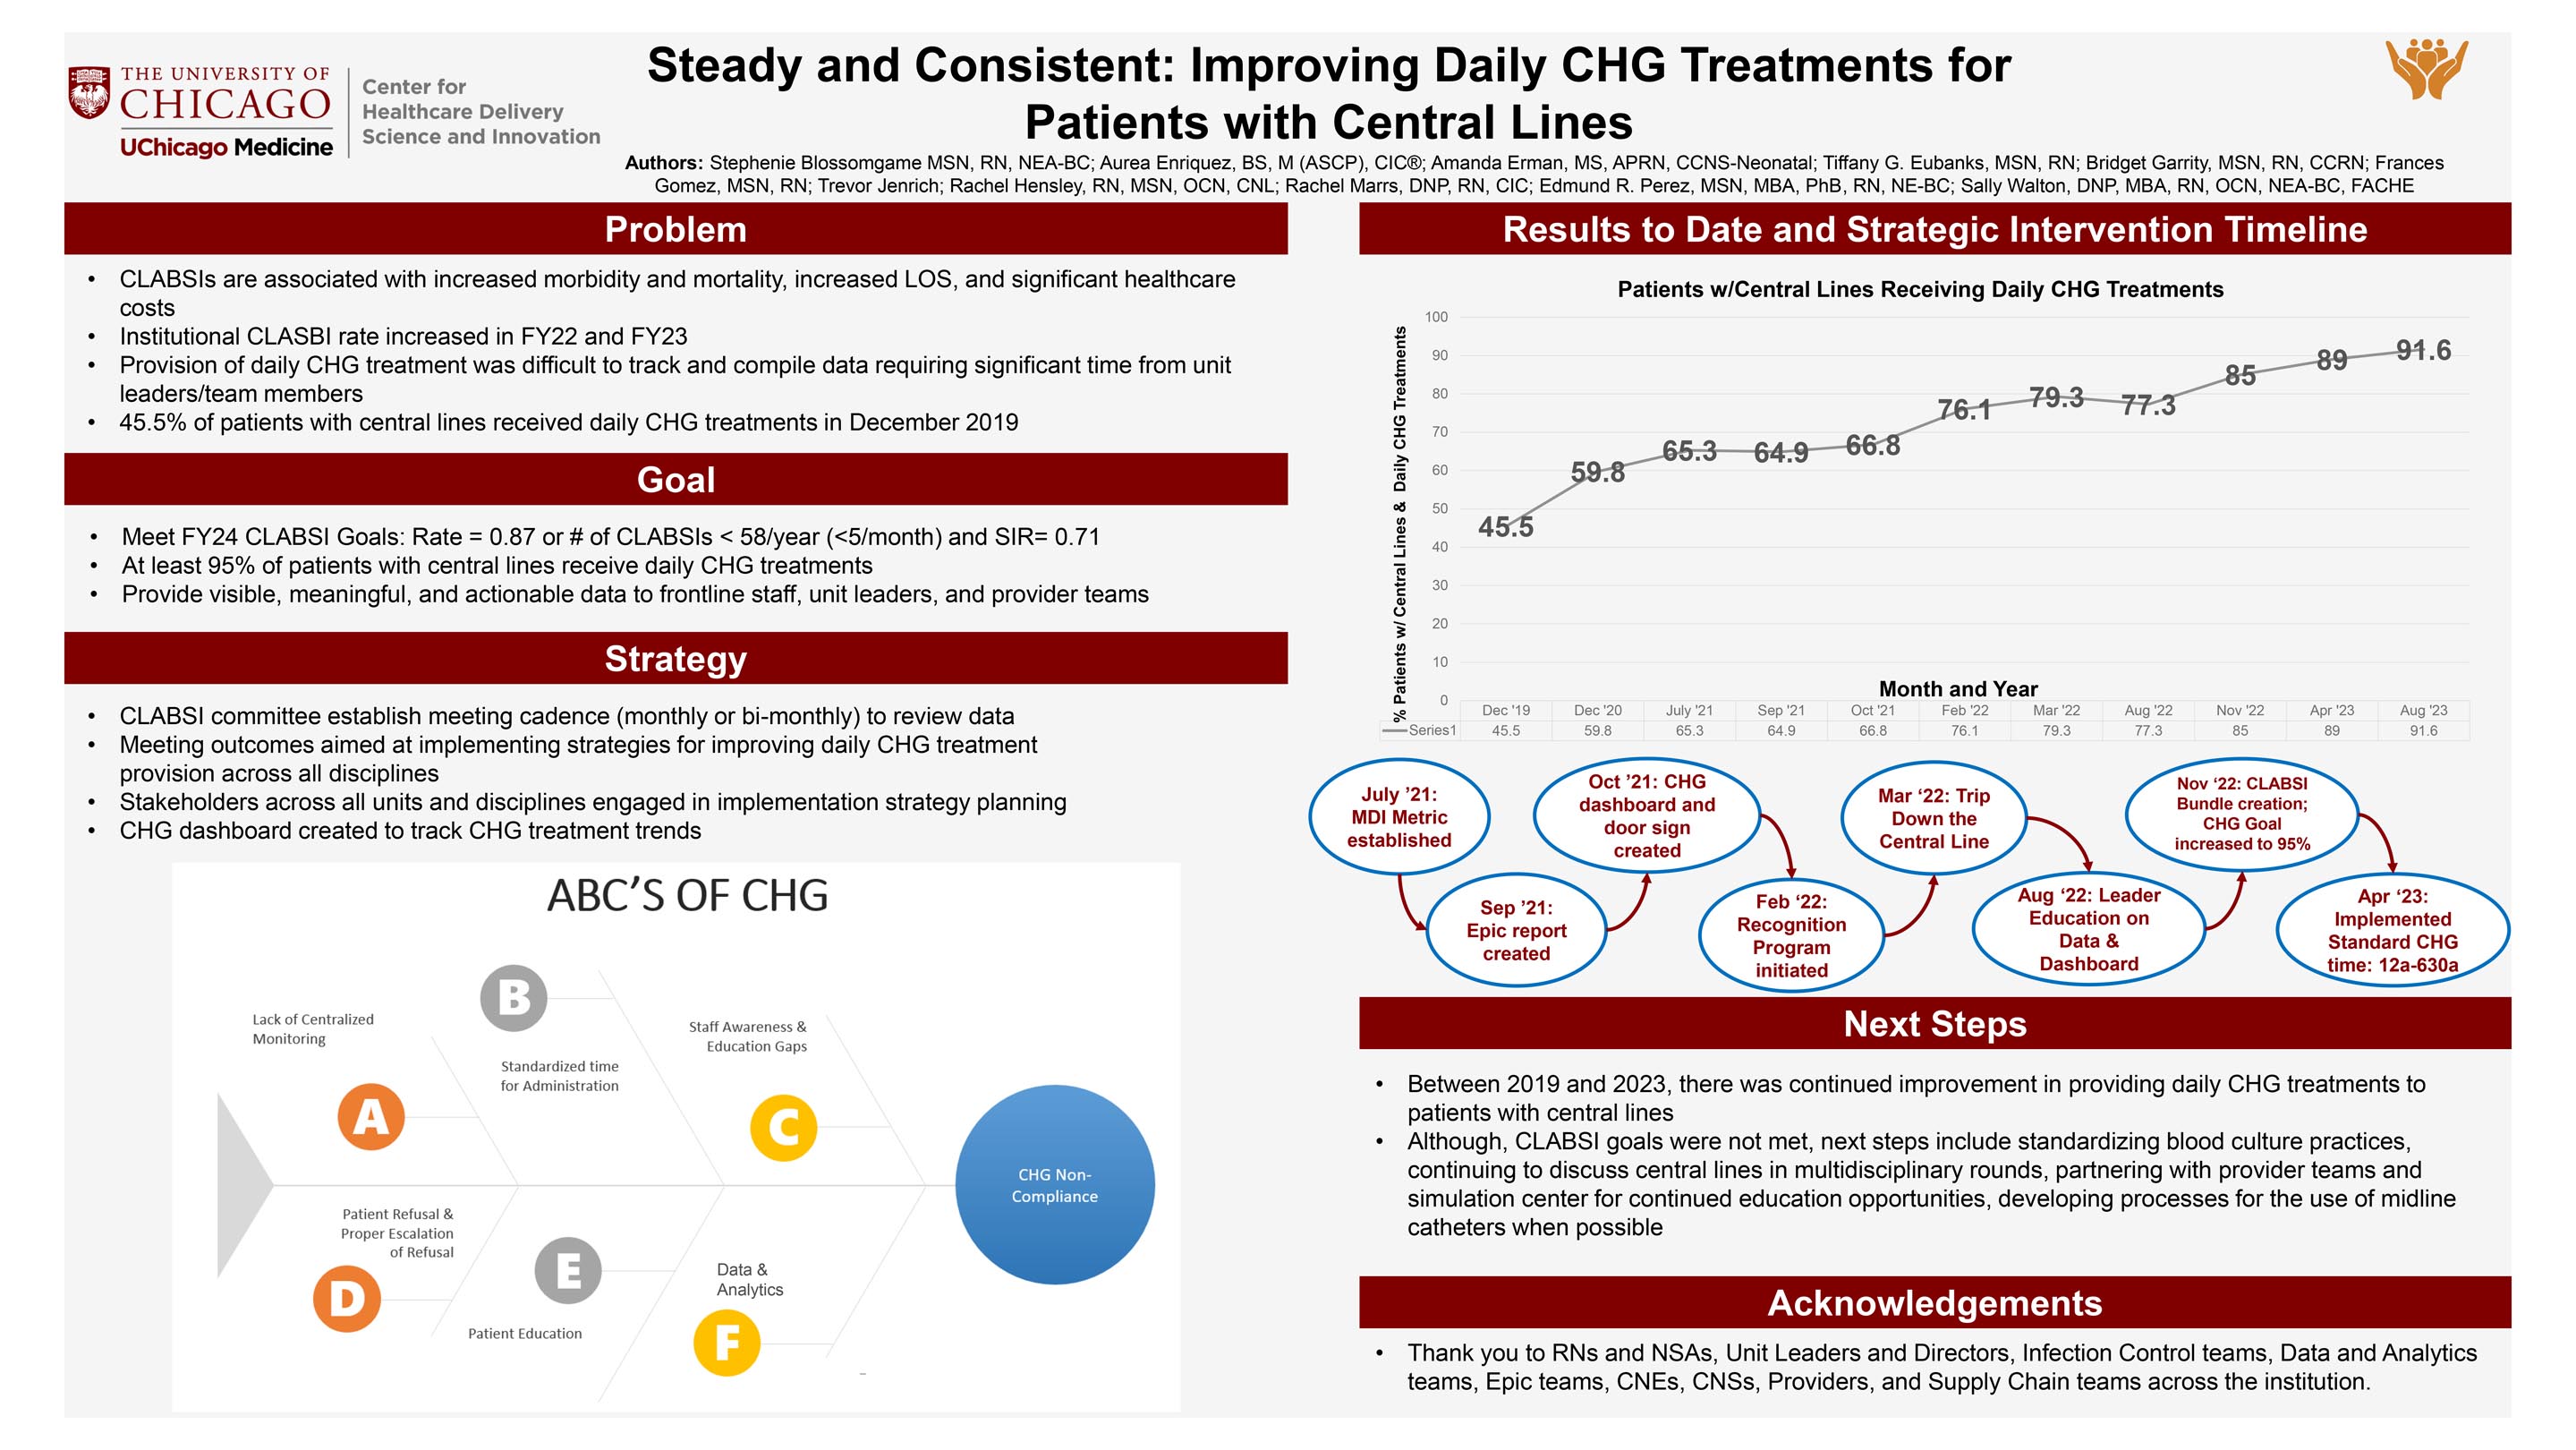 PEREZ_Steady and Consistent- Improving Daily CHG Treatments for Patients with Central Lines